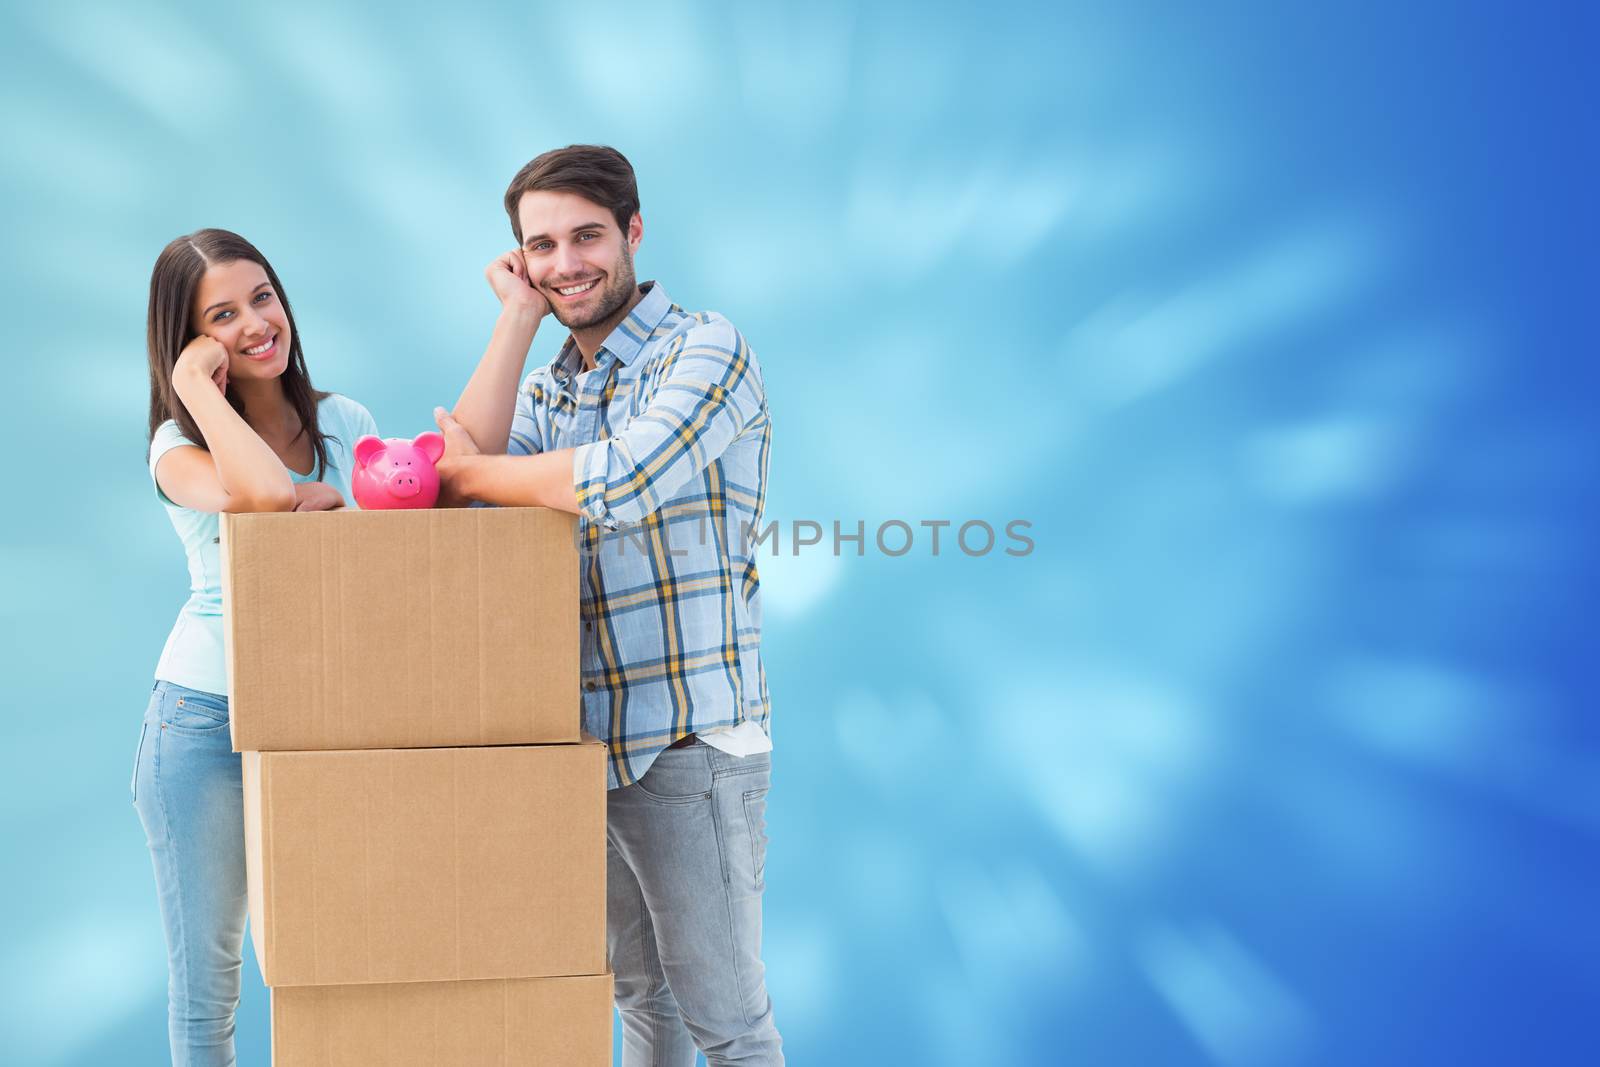 Happy young couple with moving boxes and piggy bank against valentines heart design